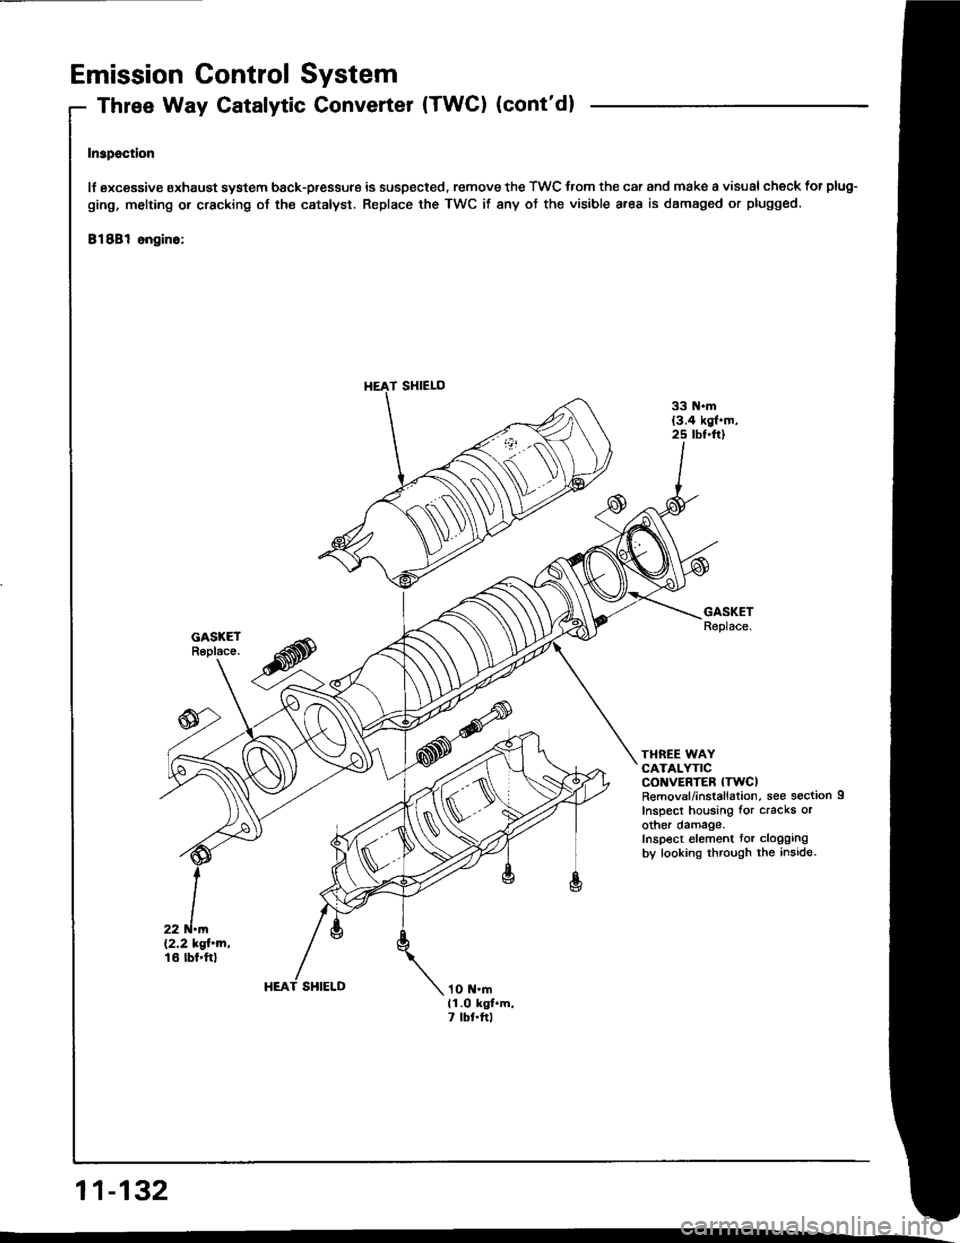 HONDA INTEGRA 1994 4.G Workshop Manual Emission Control System
Three Way Catalytic Converter (TWC) (contdl
Inspection
lf sxcessive oxhaust system back-pressure is suspected. remove the TWC trom the car and make a visual check for plug-
gi